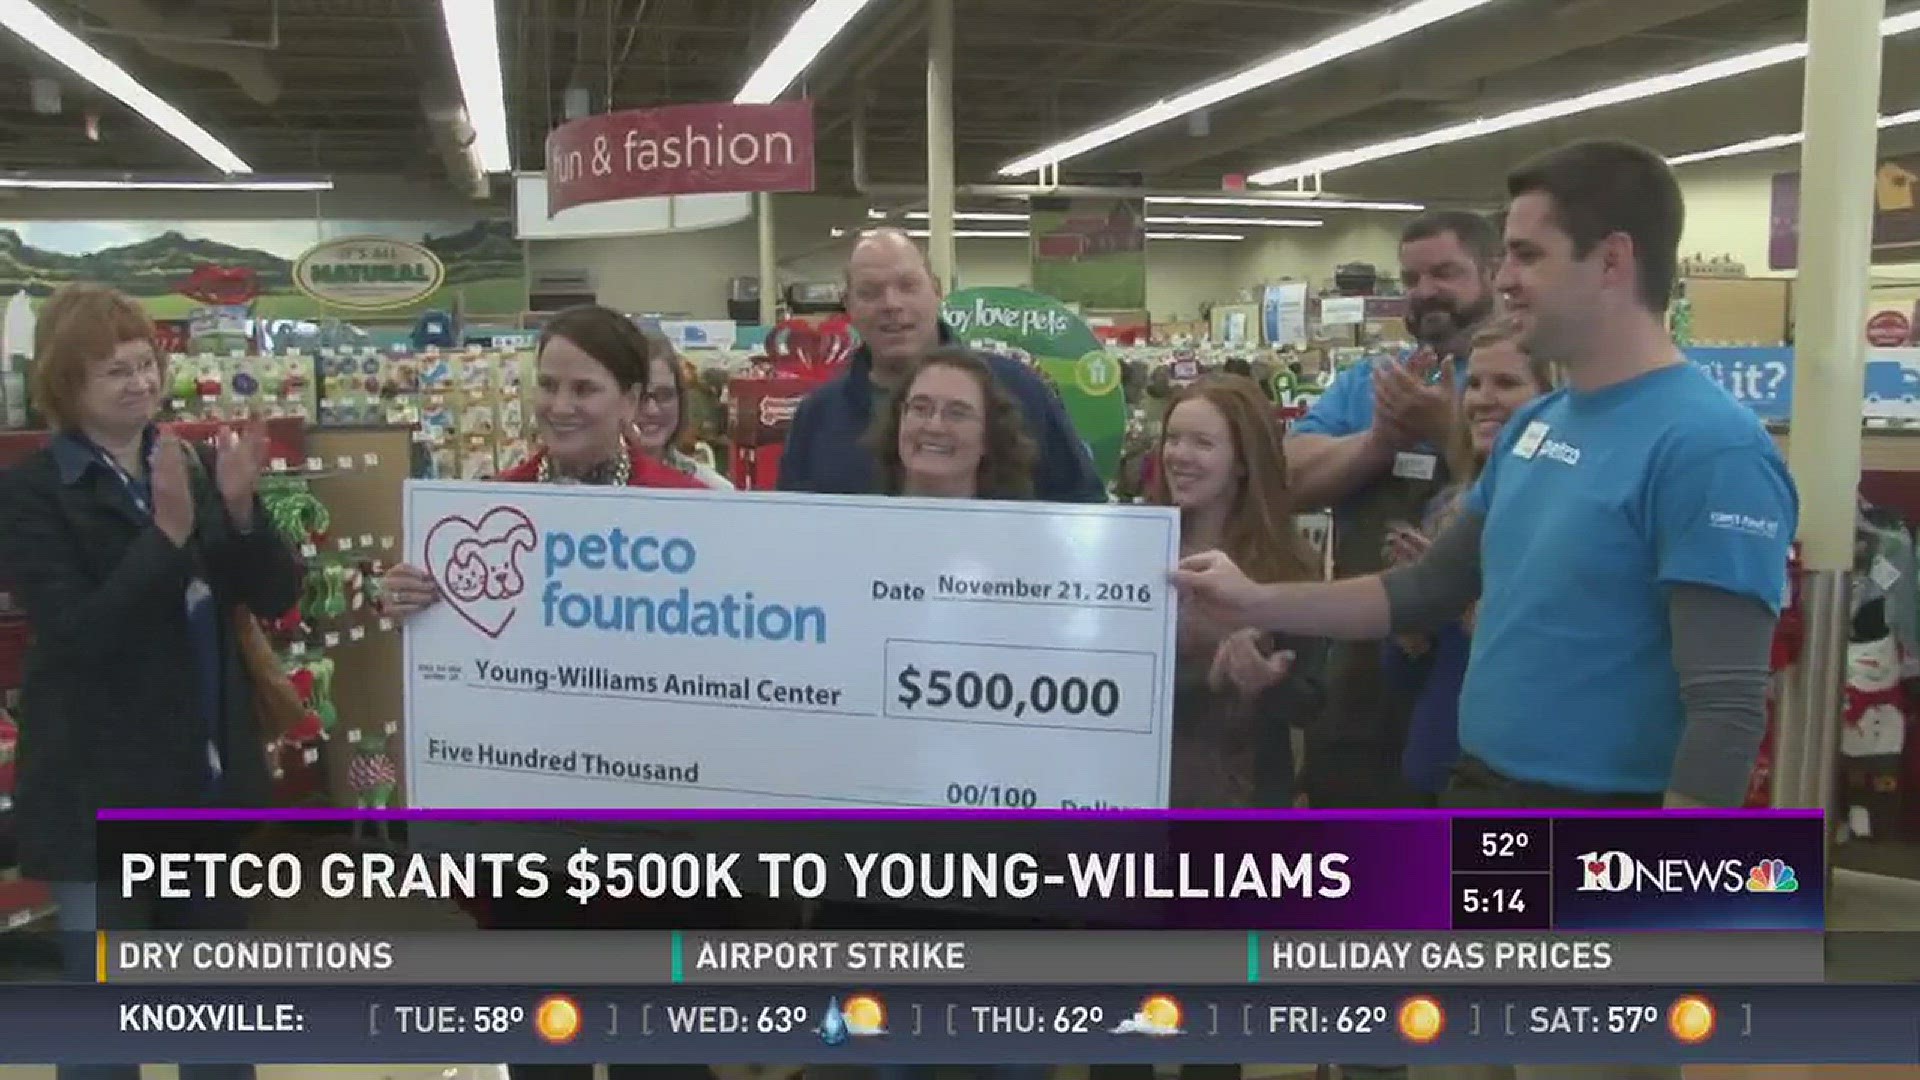 Petco presented a $500,000 check from the Petco Foundation to Young-Williams Animal Center Monday. Young-Williams will use that money towards initiative and renovation efforts over the next two years. November 21, 2016.